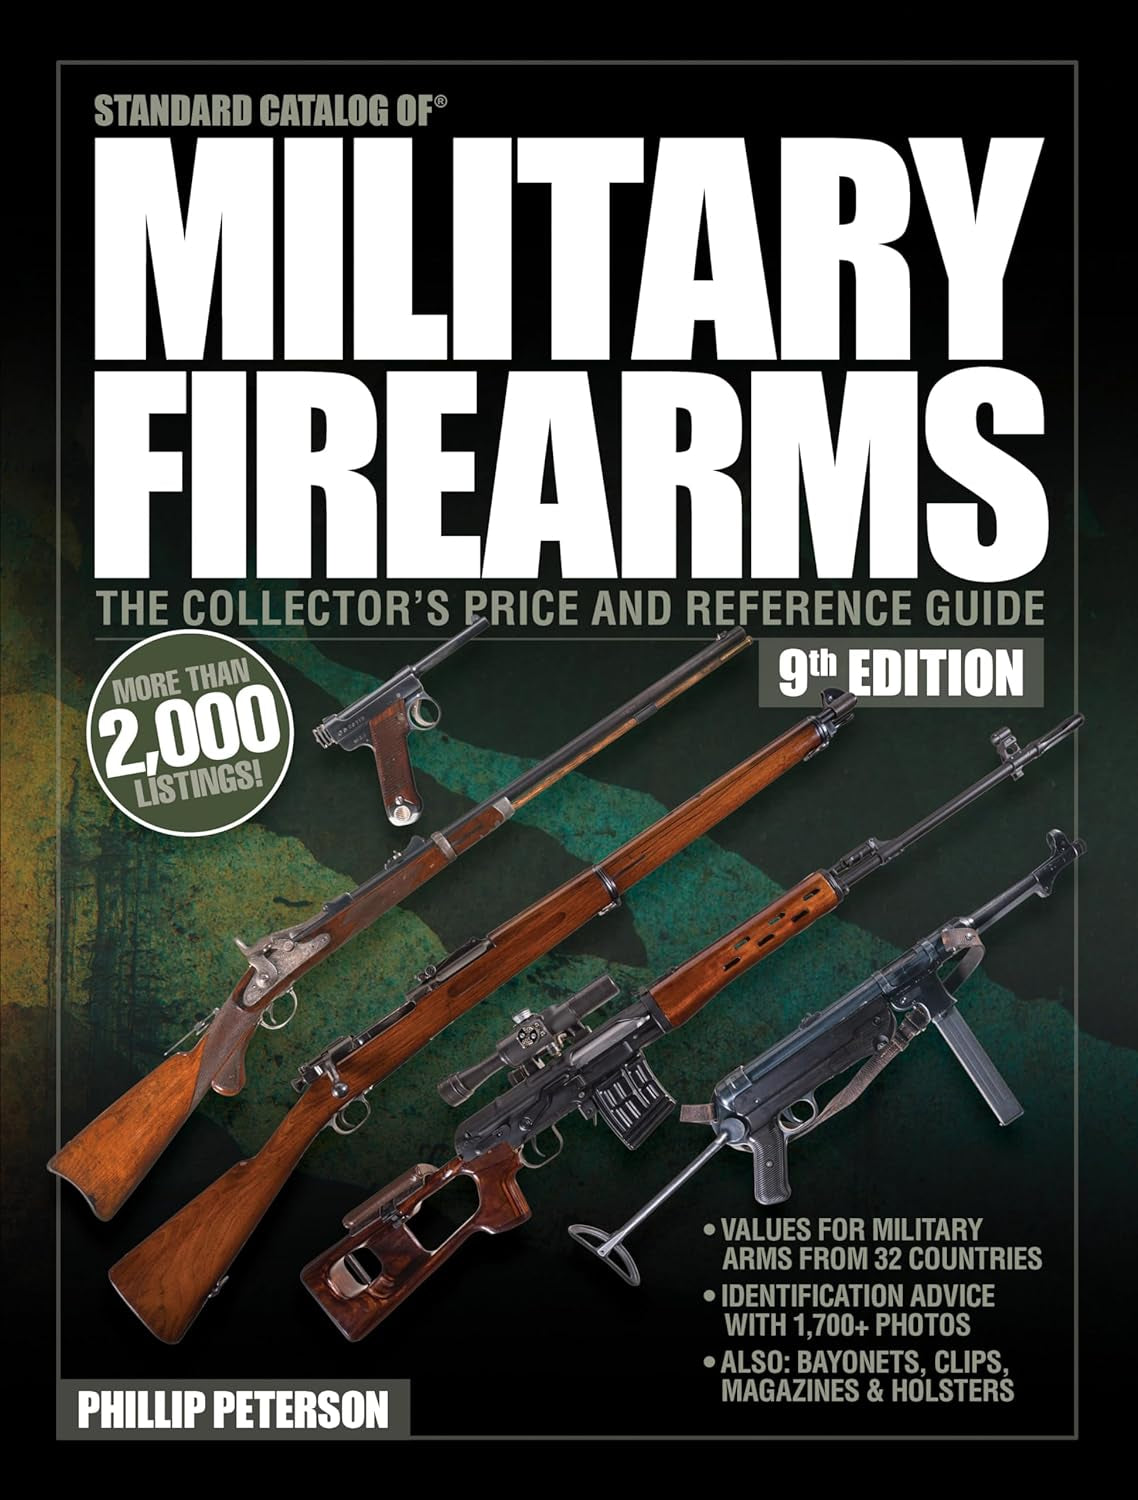 Standard Catalog of Military Firearms (9th Edition): The Collector’s Price & Reference Guide